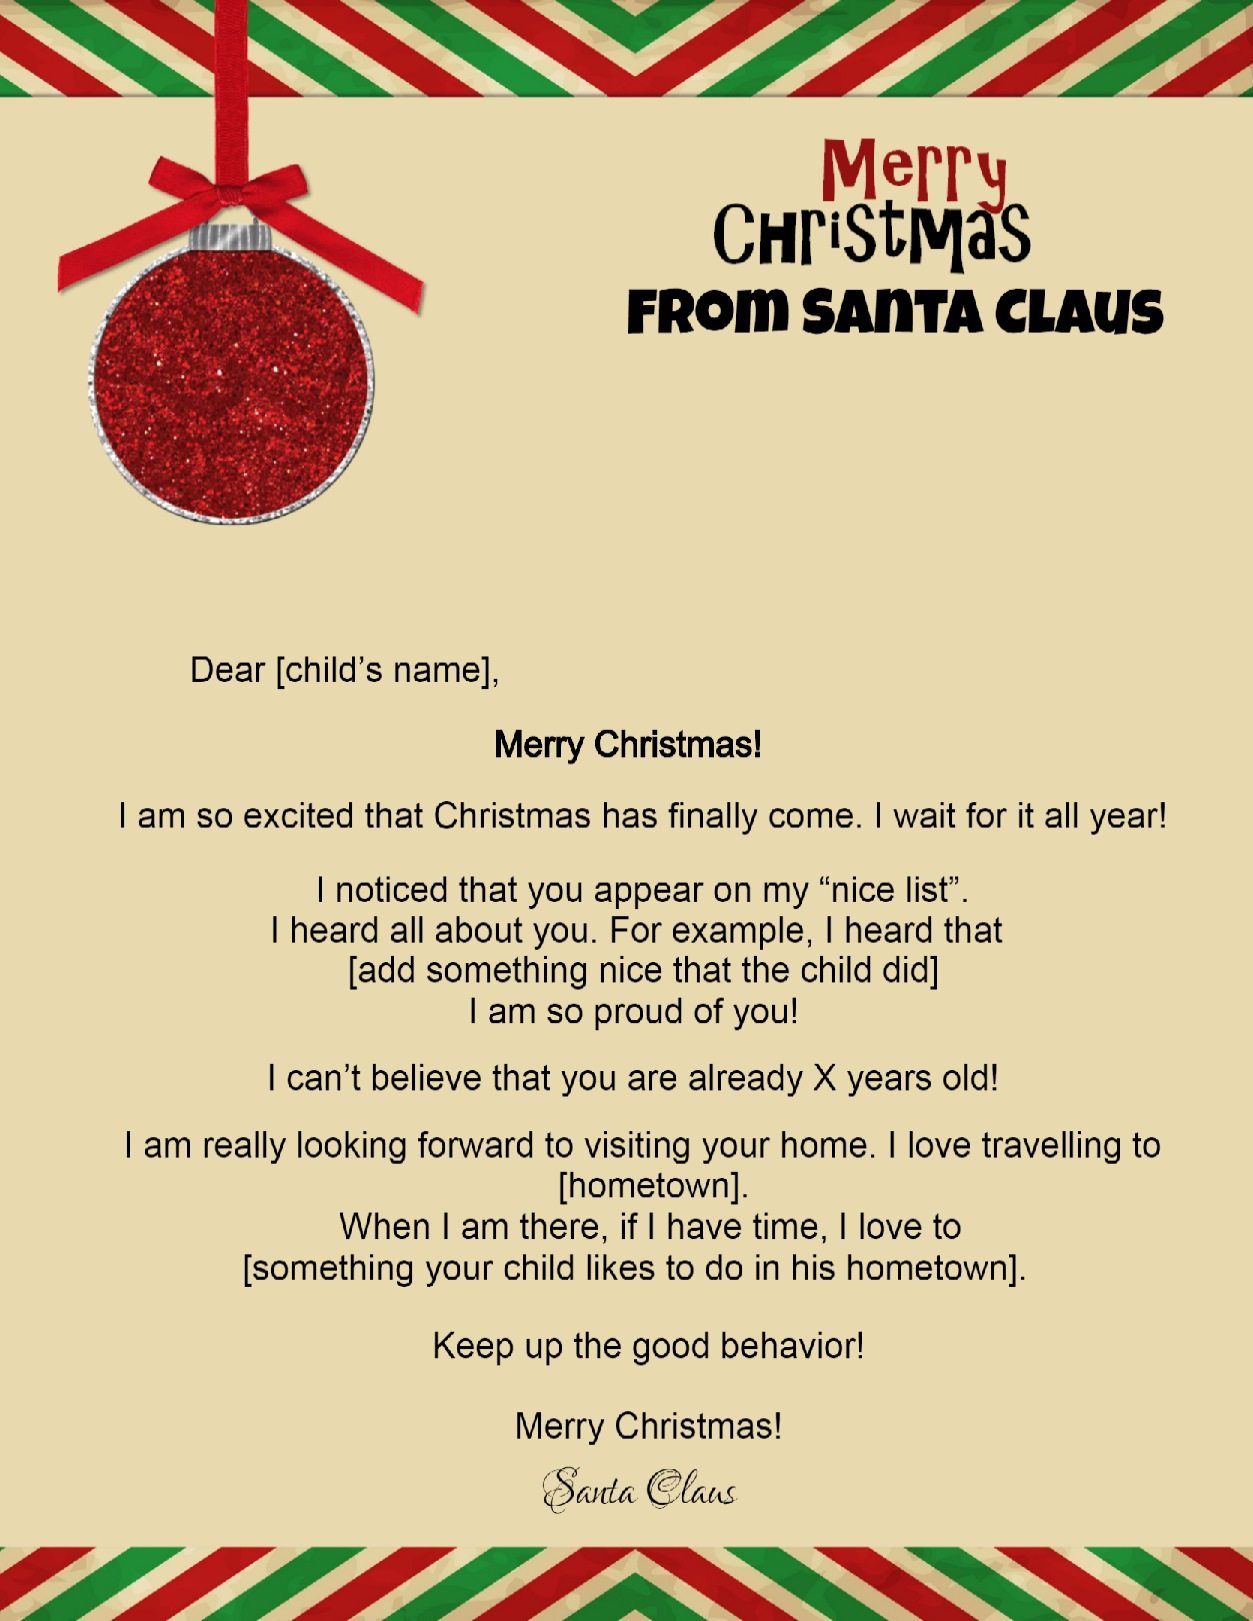 free-letters-from-santa